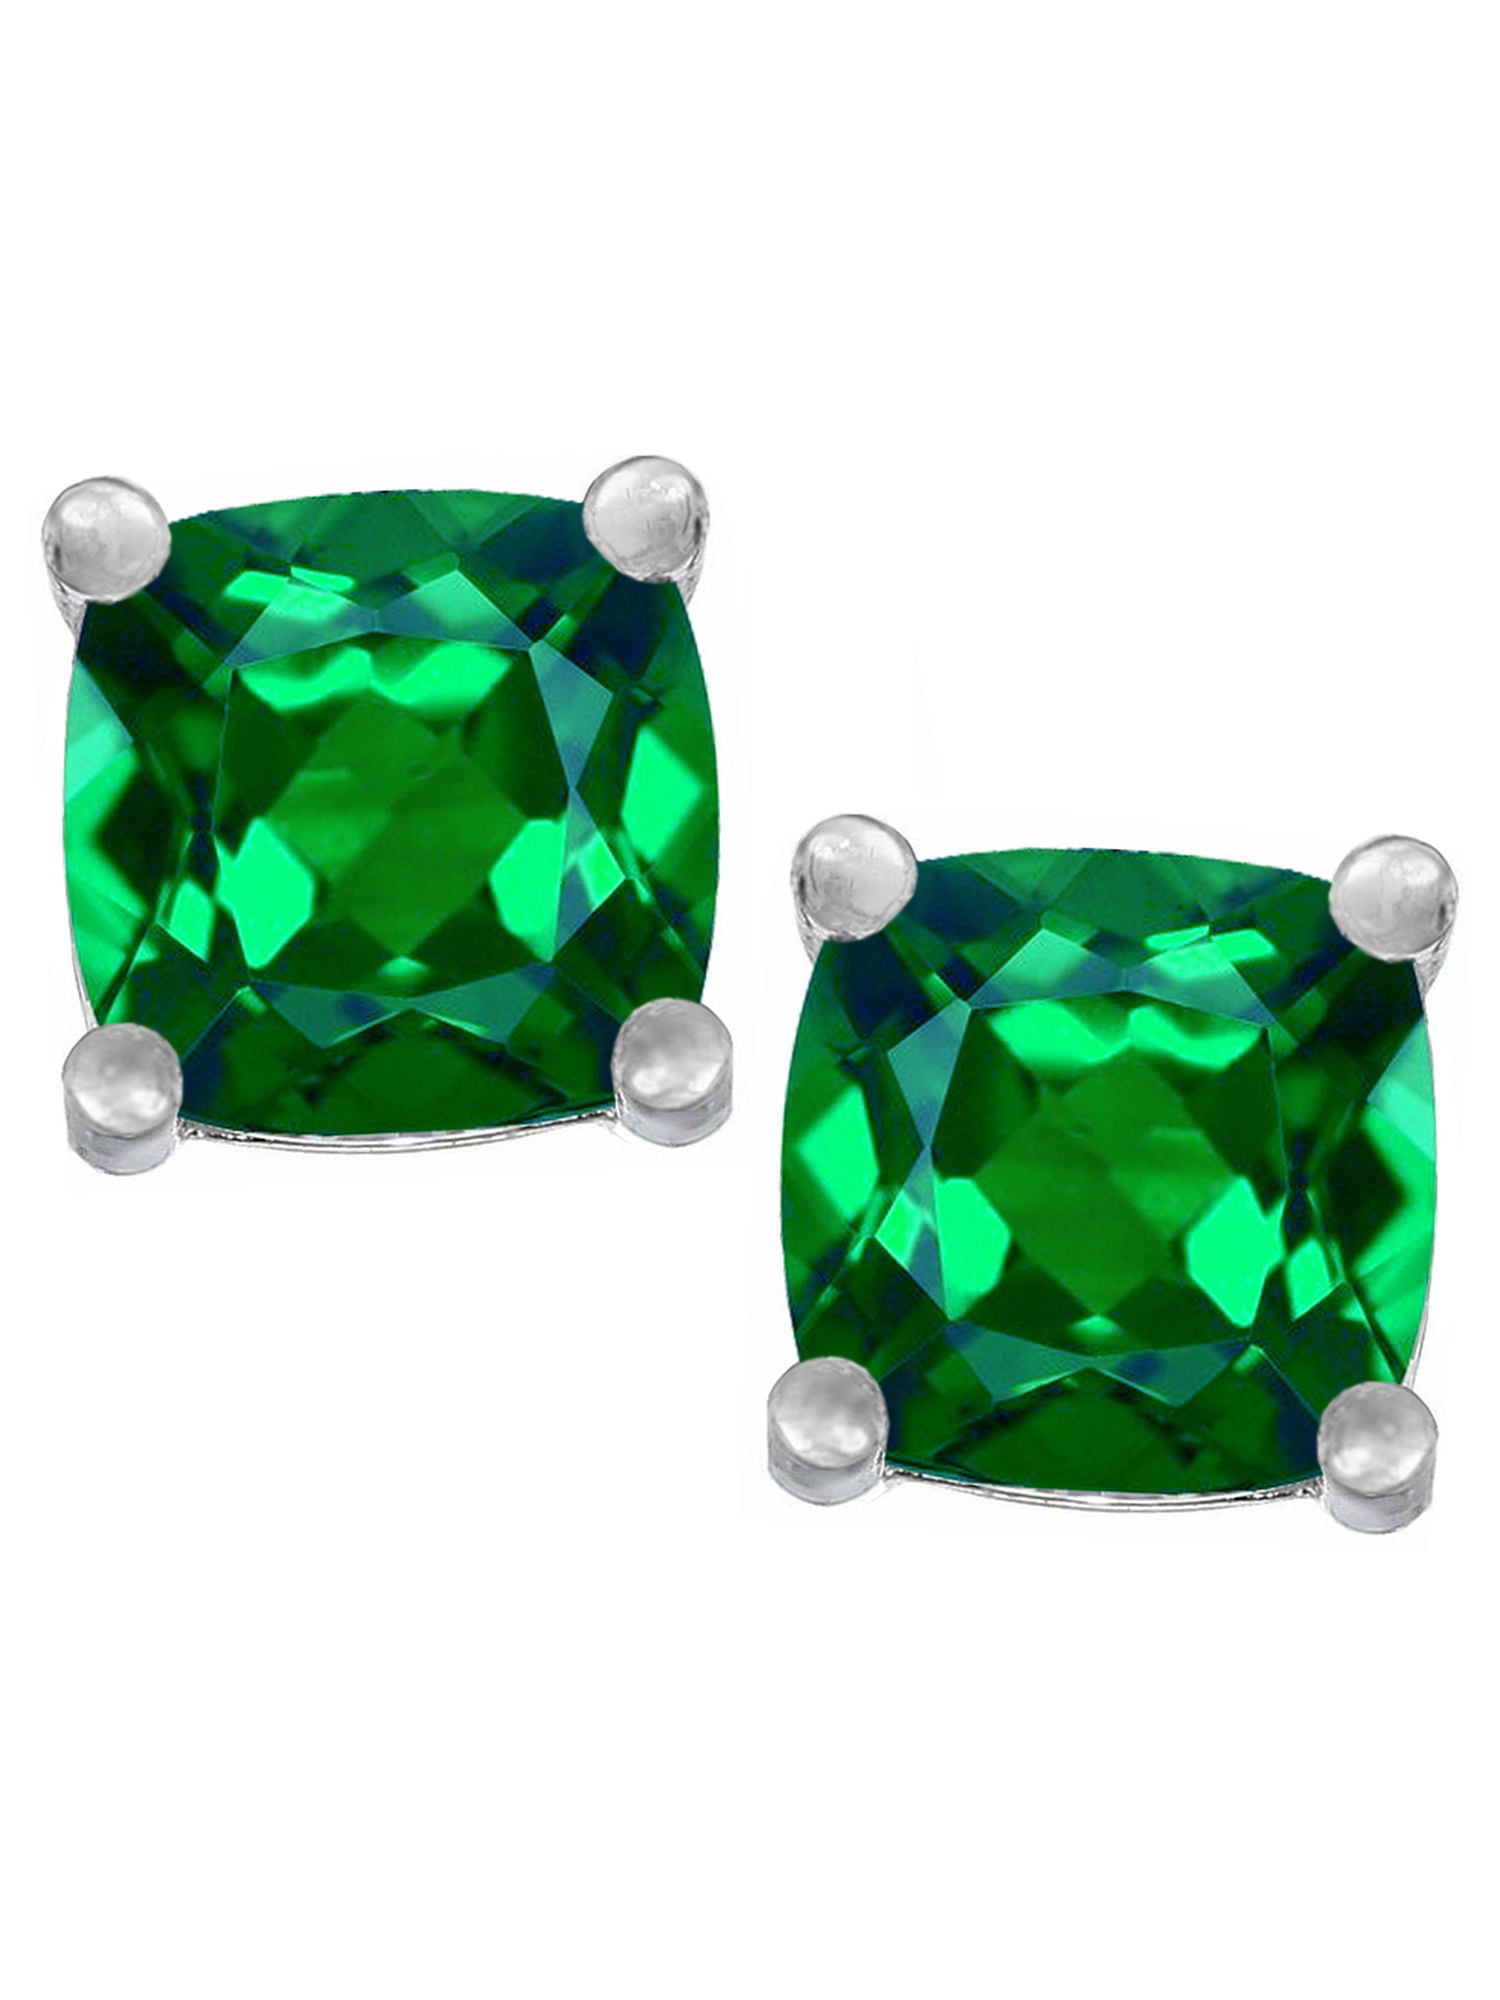 Nano Gems Rich in Color Acacia Collection Premium Quality Simulated Emerald Martini 4 Prongs Sterling Silver Hypoallergenic Stud Earrings Cushion 3.00 ctw Gems Cut 7x7mm Flat on Ear Elegant! 